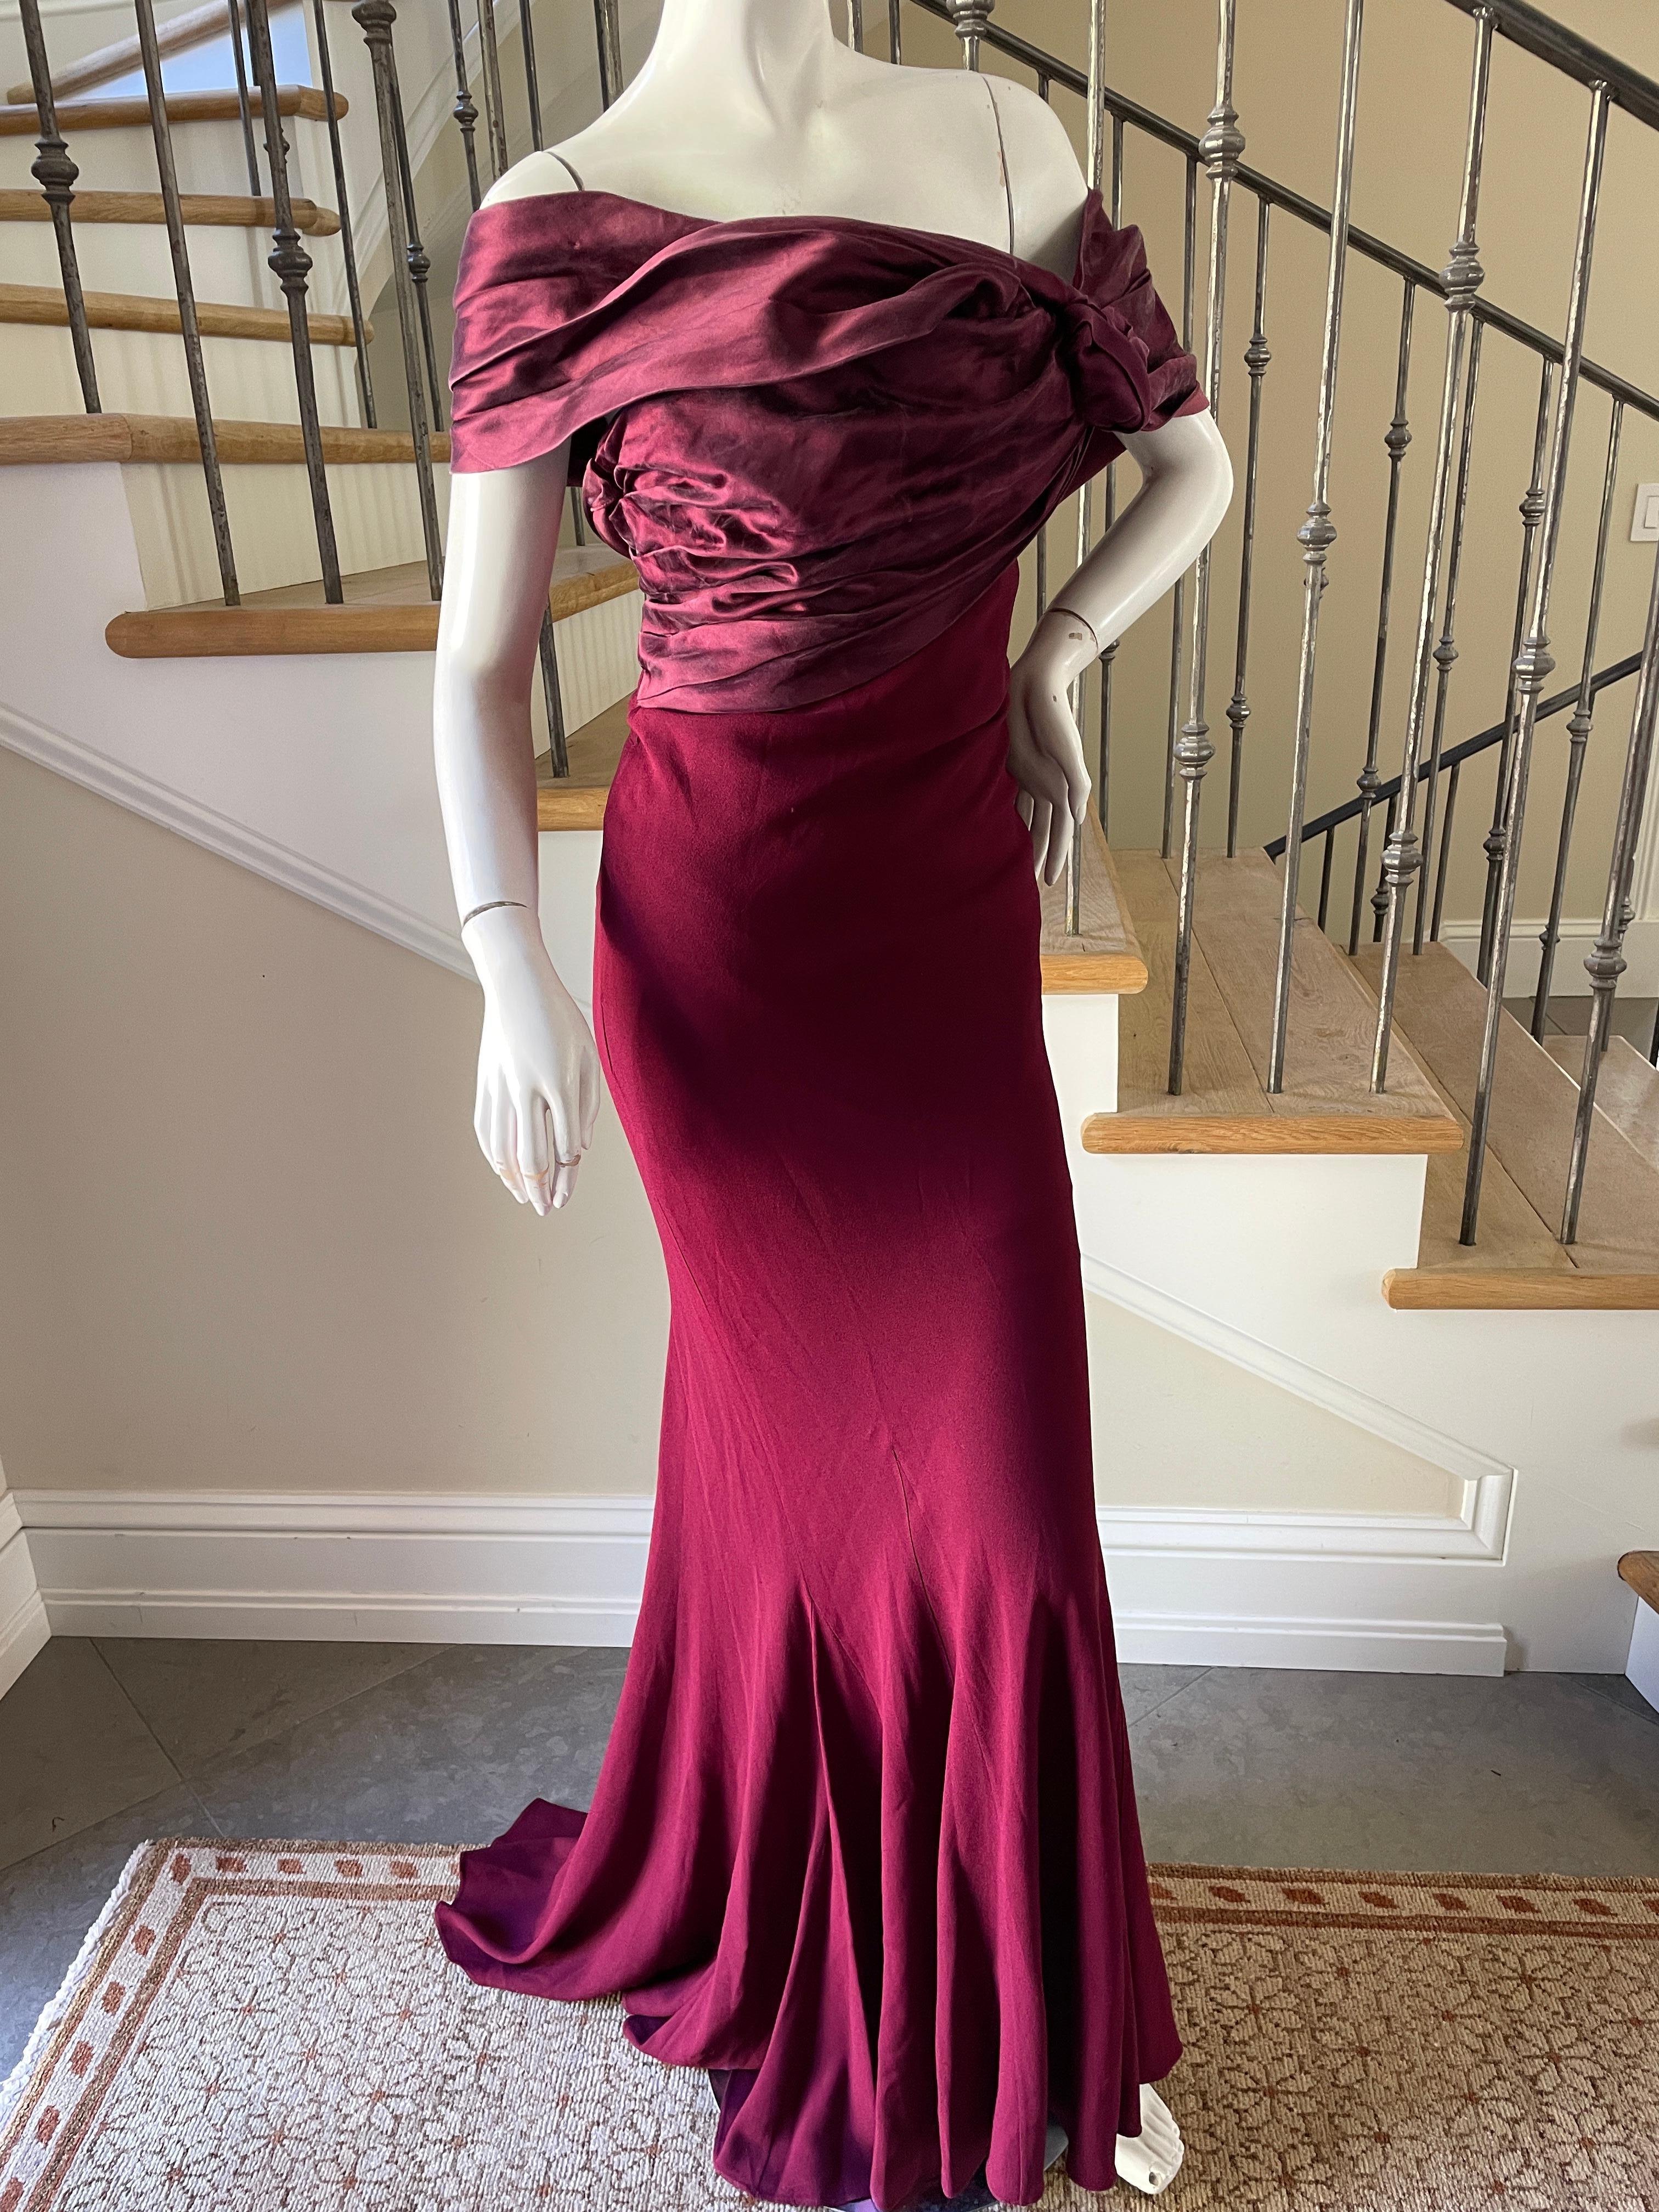 Christian Dior by John Galliano Burgundy Red Draped Evening Dress For Sale 5